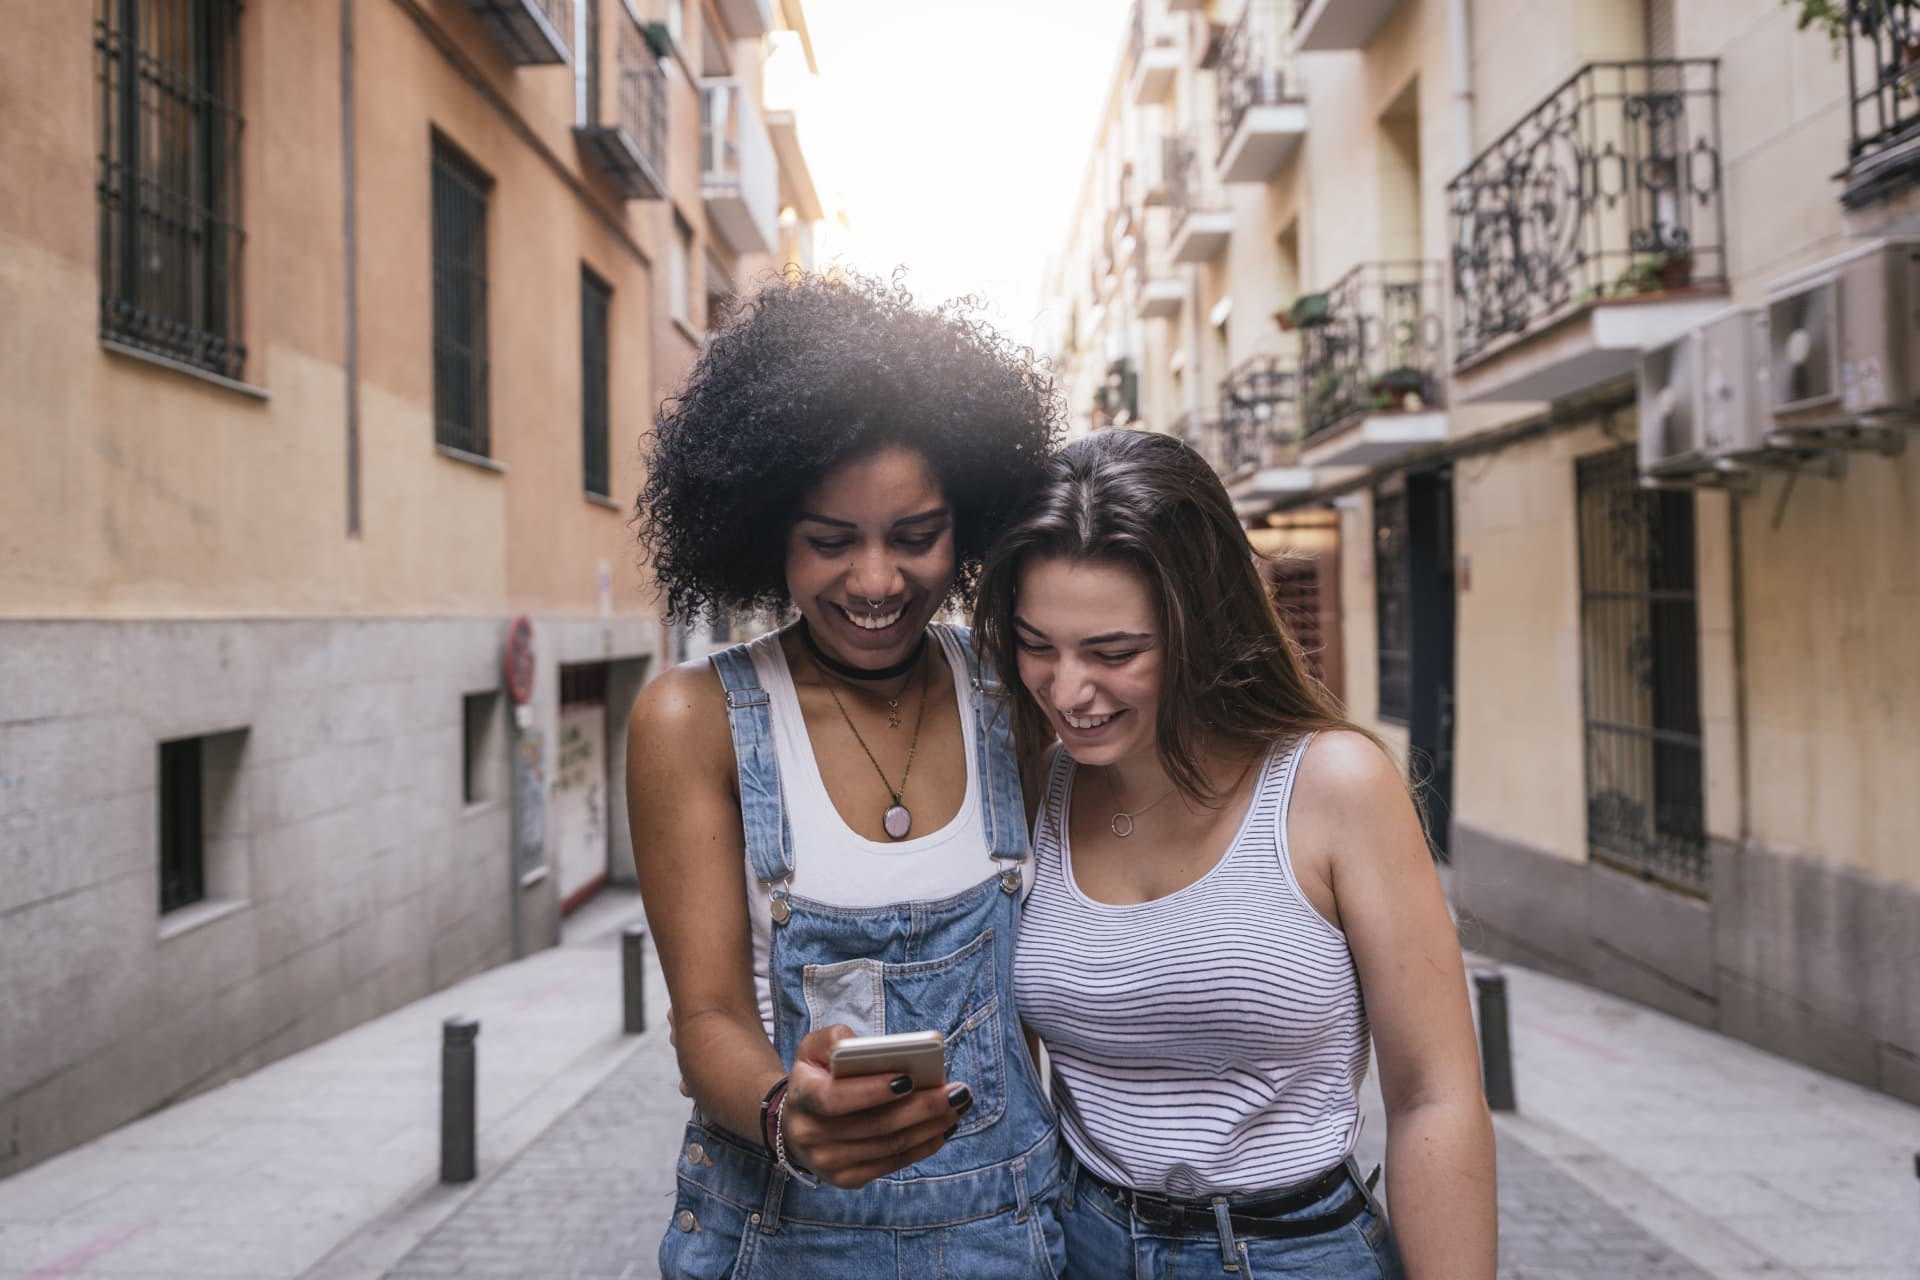 Two smiling people with their arms around each other both looking at a smartphone one of them is holding.